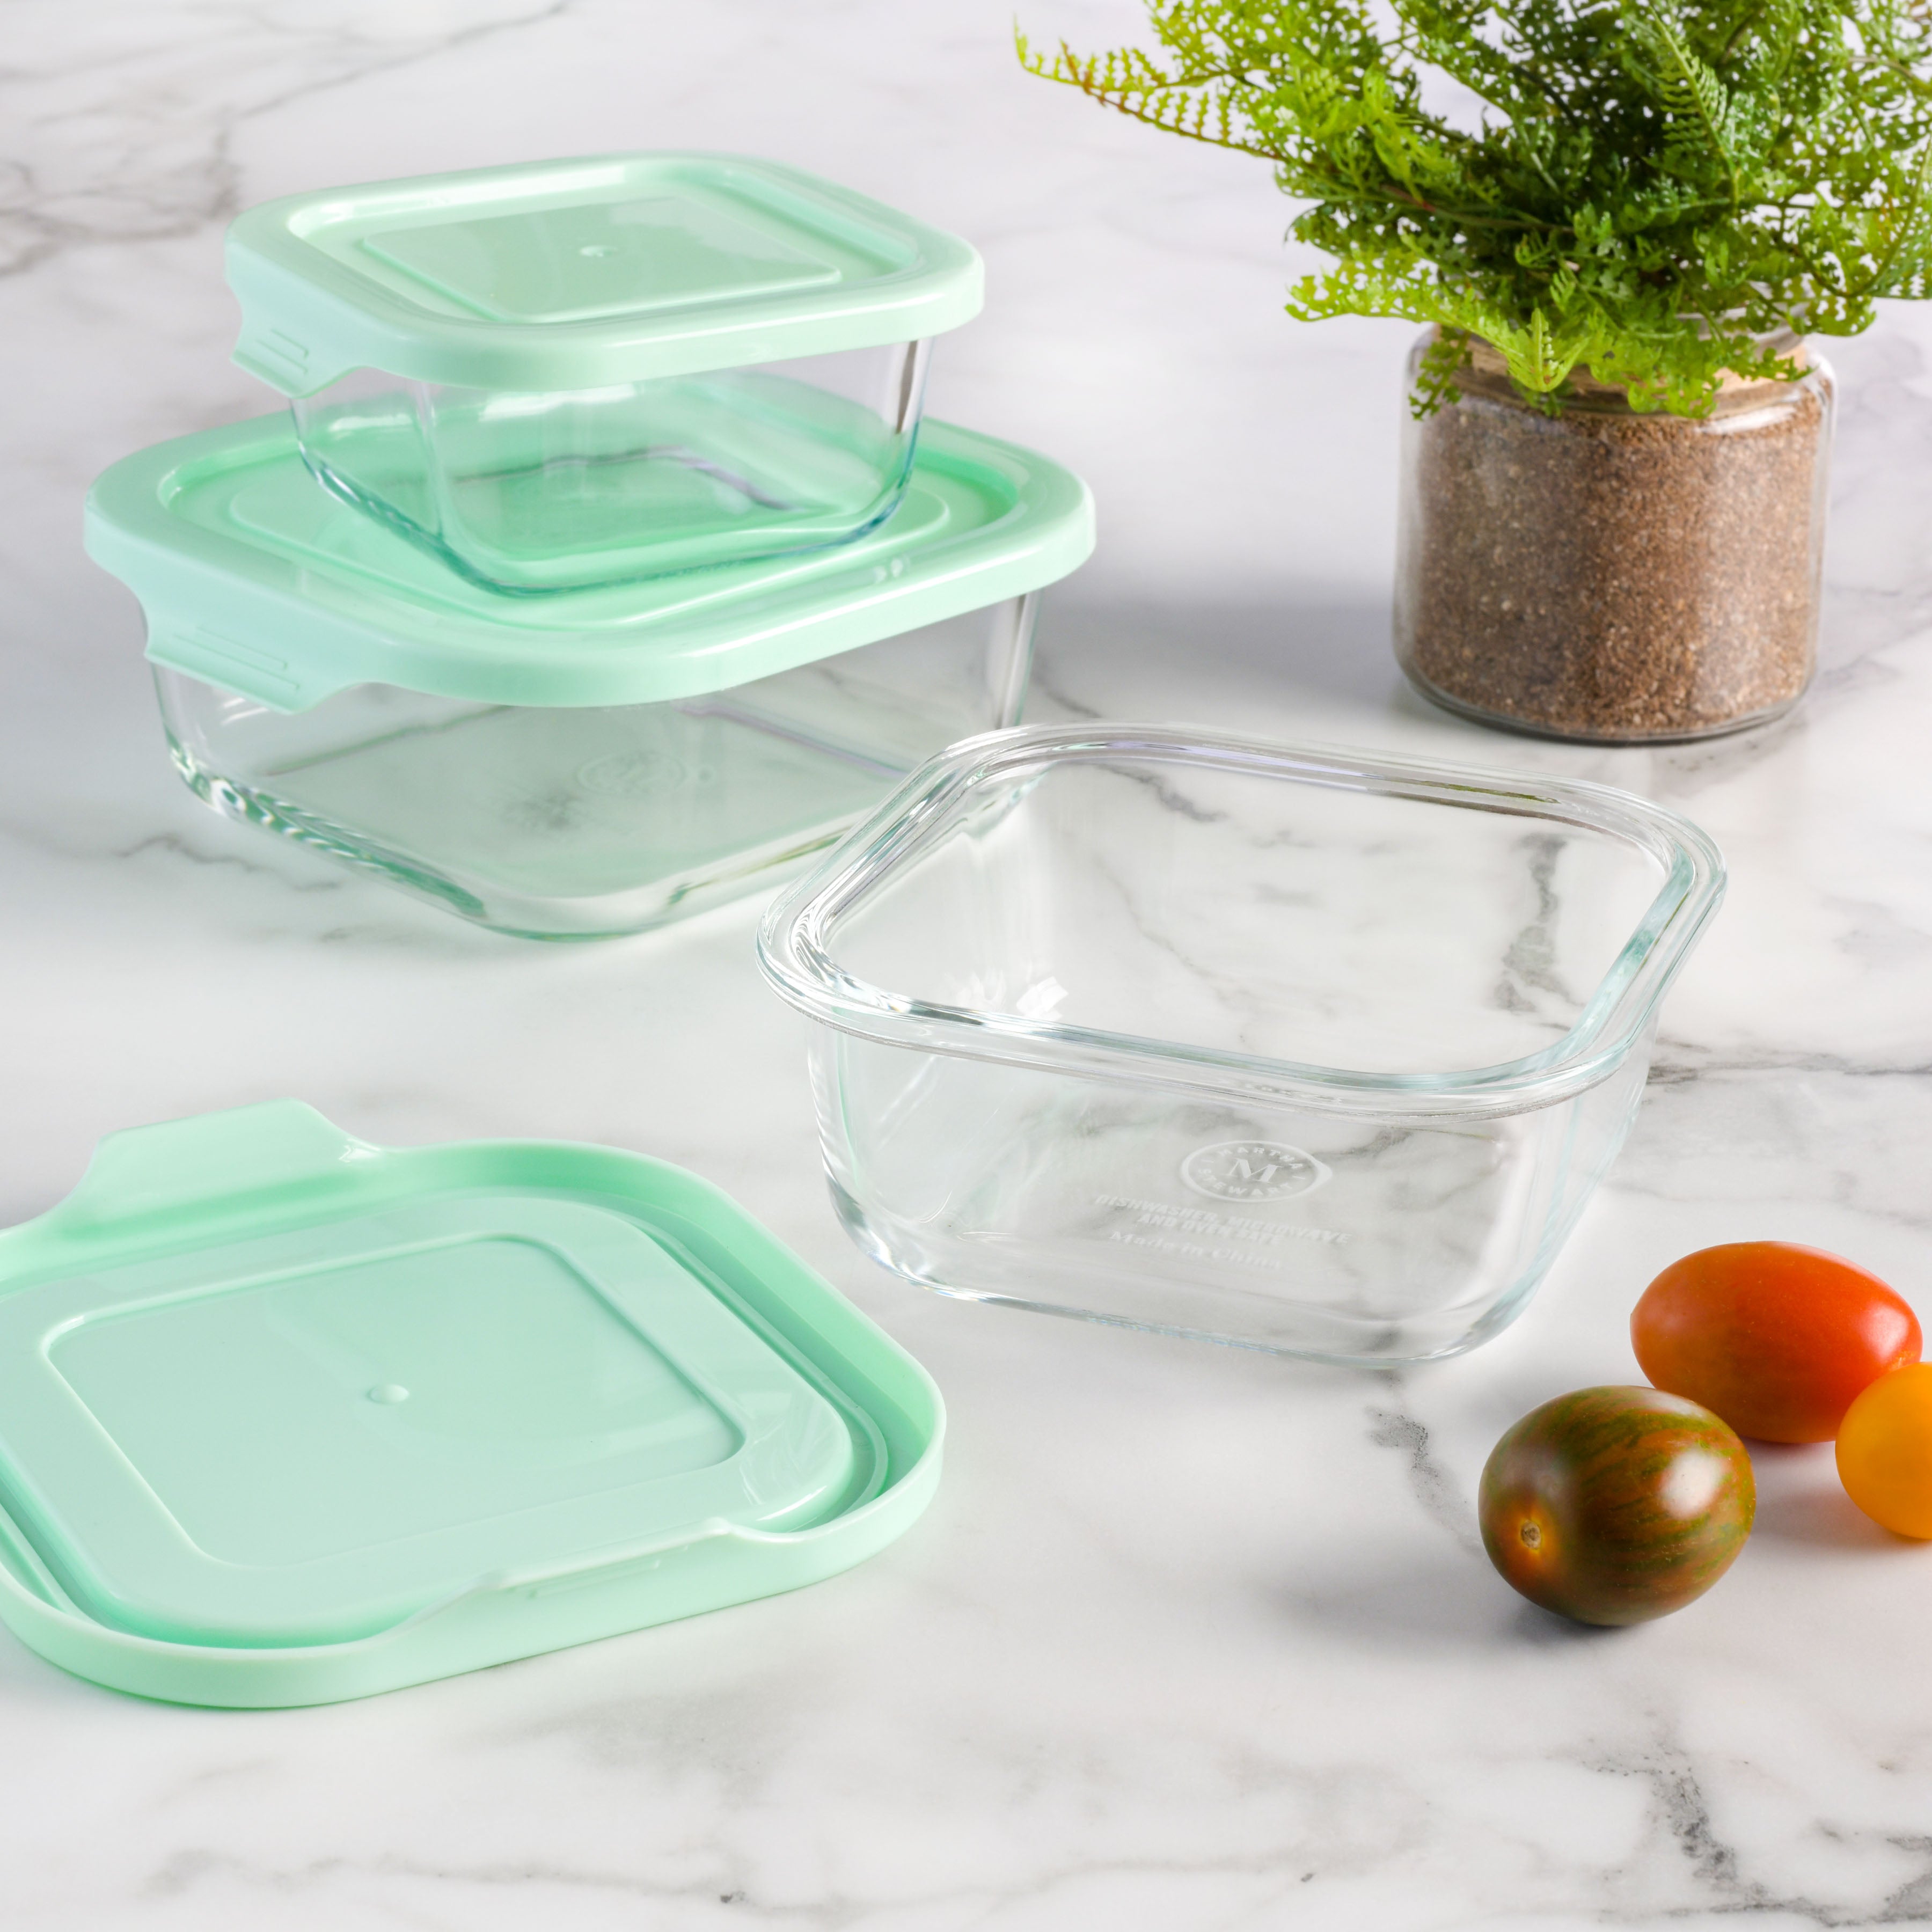 12pc (set Of 6) Plastic Food Storage Container Set With Lids Clear